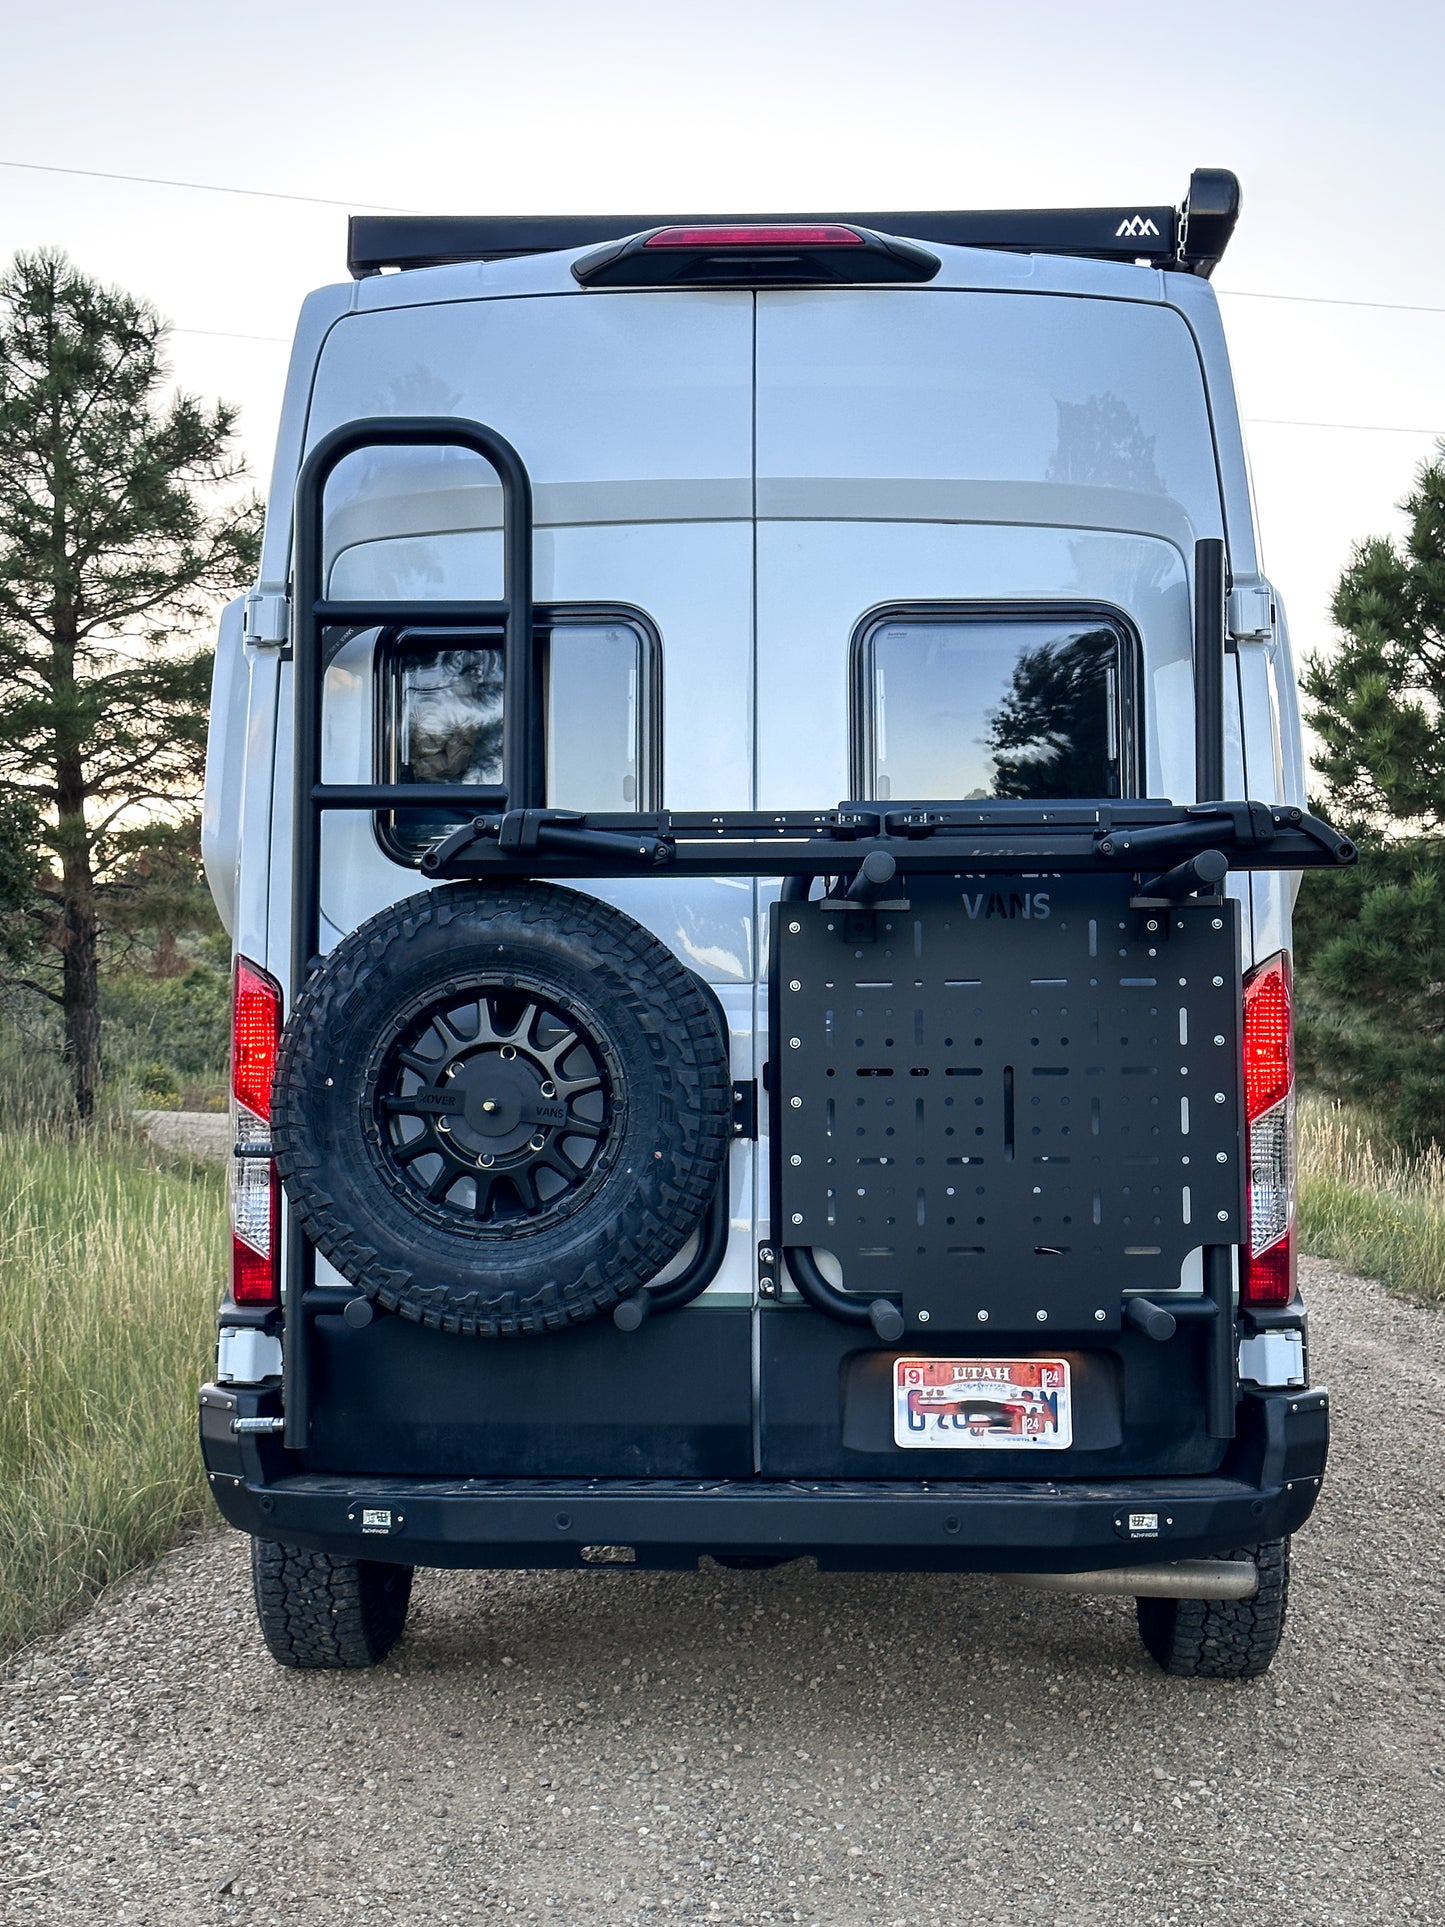 Rover Vans Accessory Rack (Ford Transit)